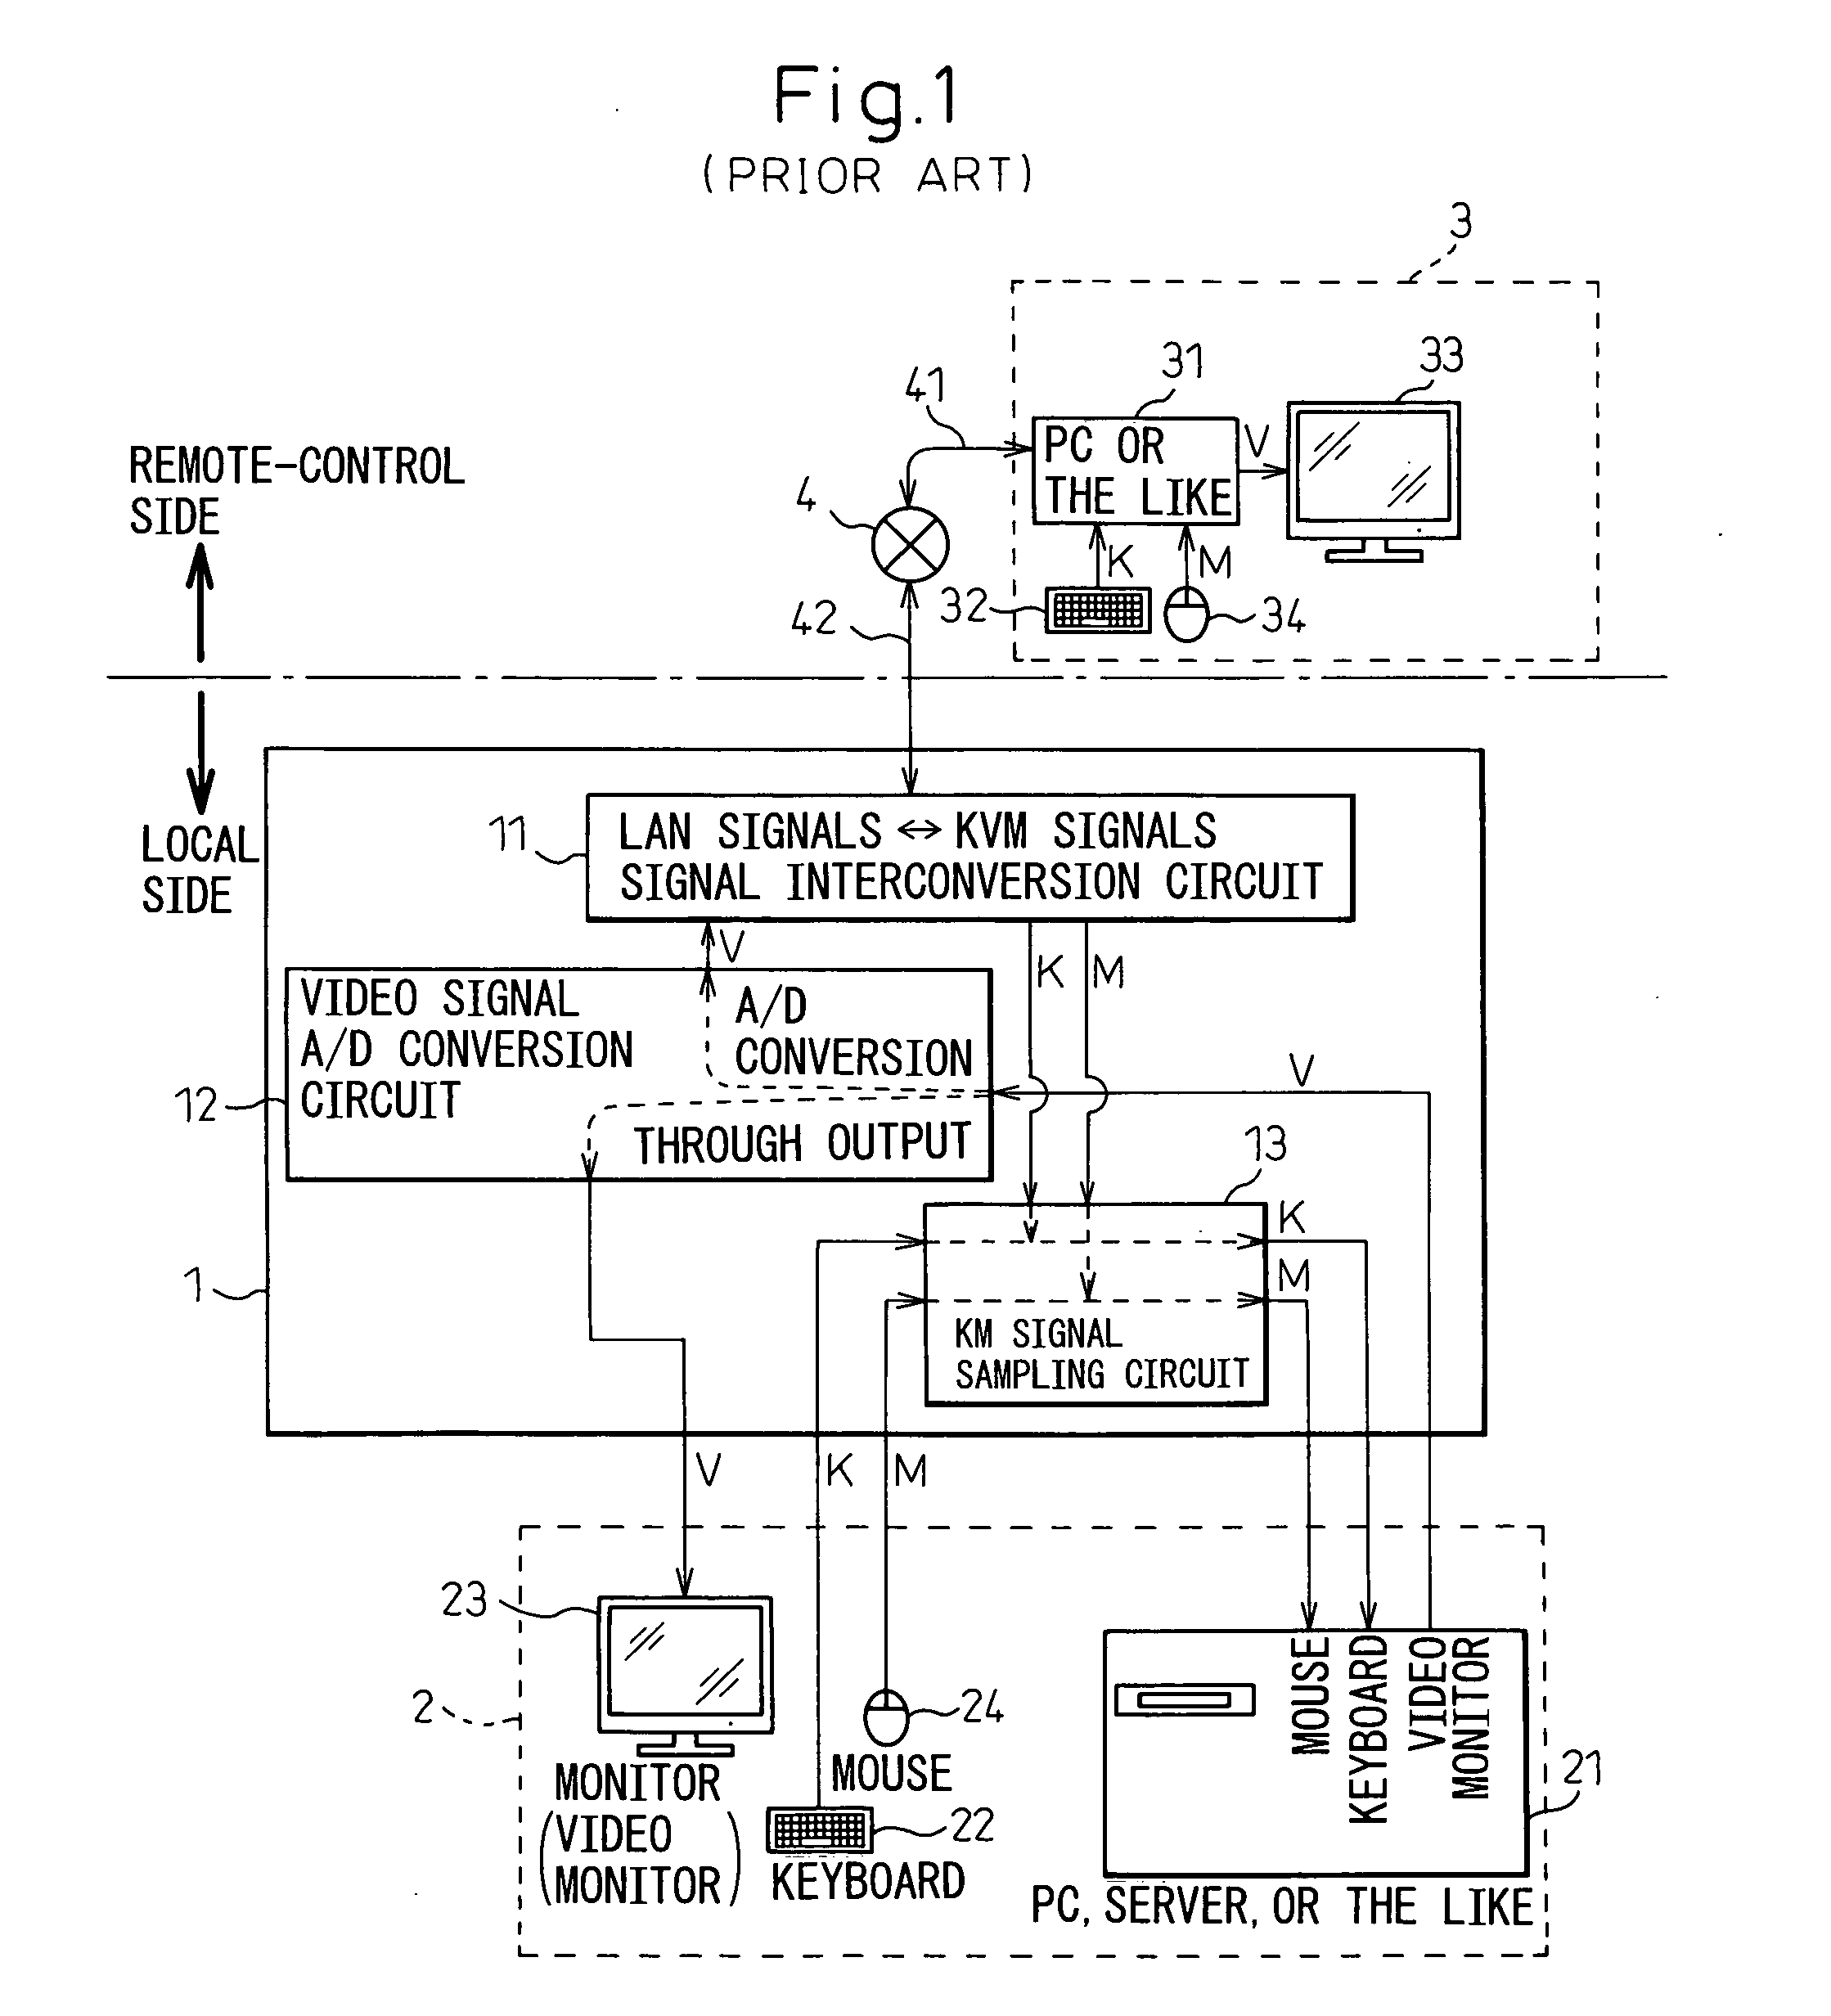 Switching device for remotely controlling connections of a computer and peripherals over networks